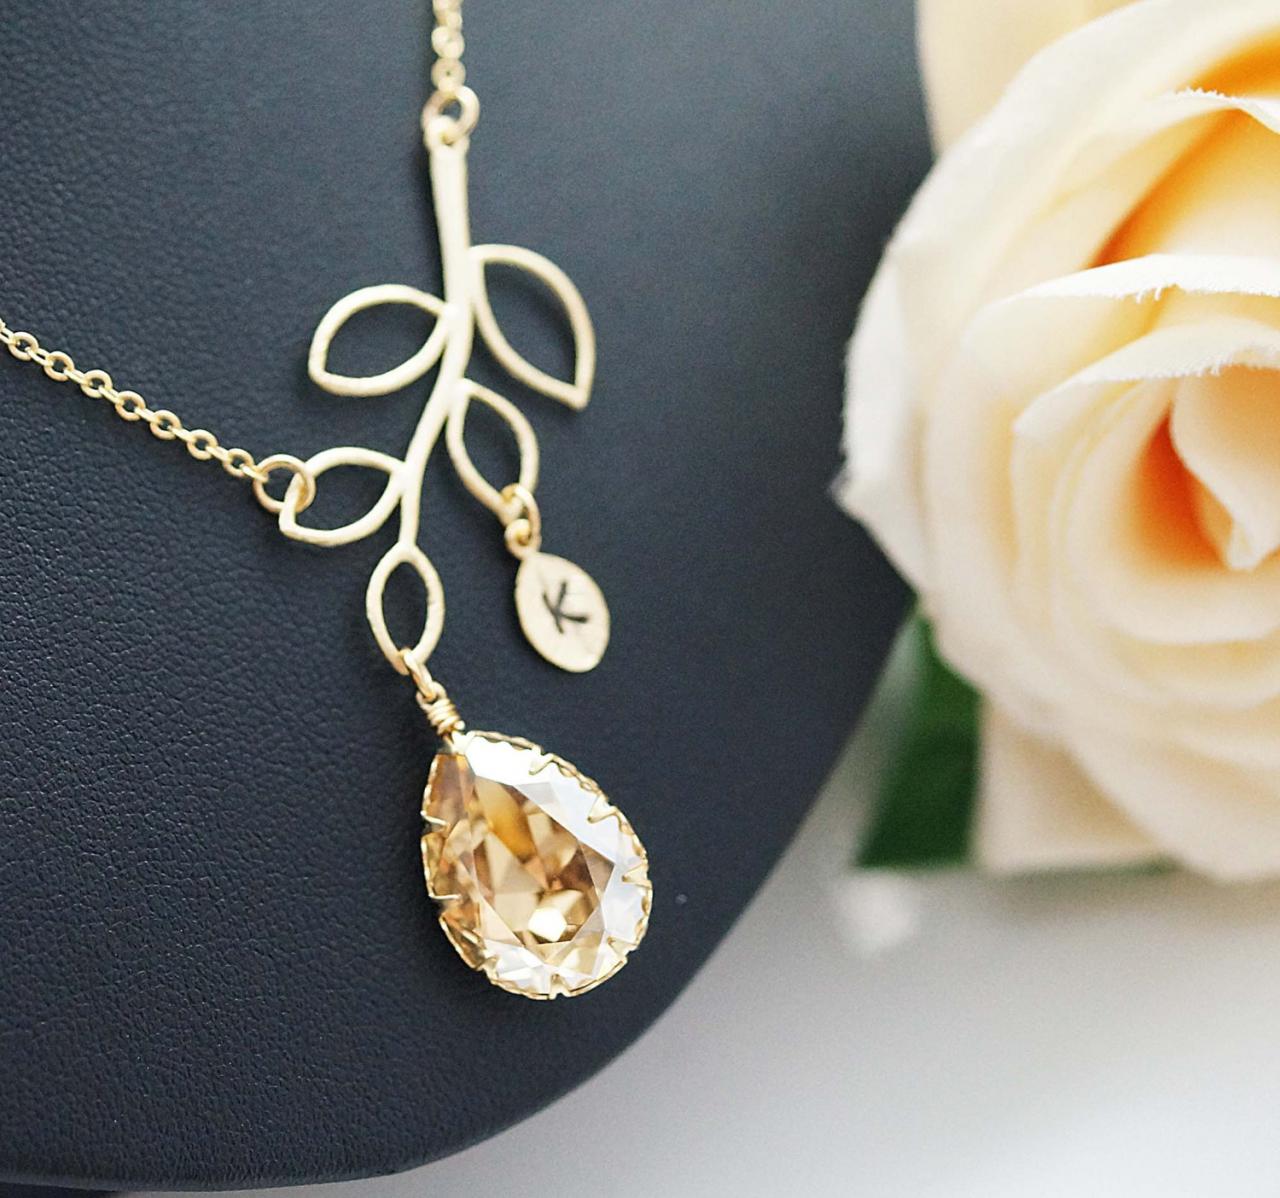 Personalized Necklace Bridesmaid Gift Simple Leaf with Swarovski Tear drop and initial leaf charm Necklace , Christmas gift . Gift for Her